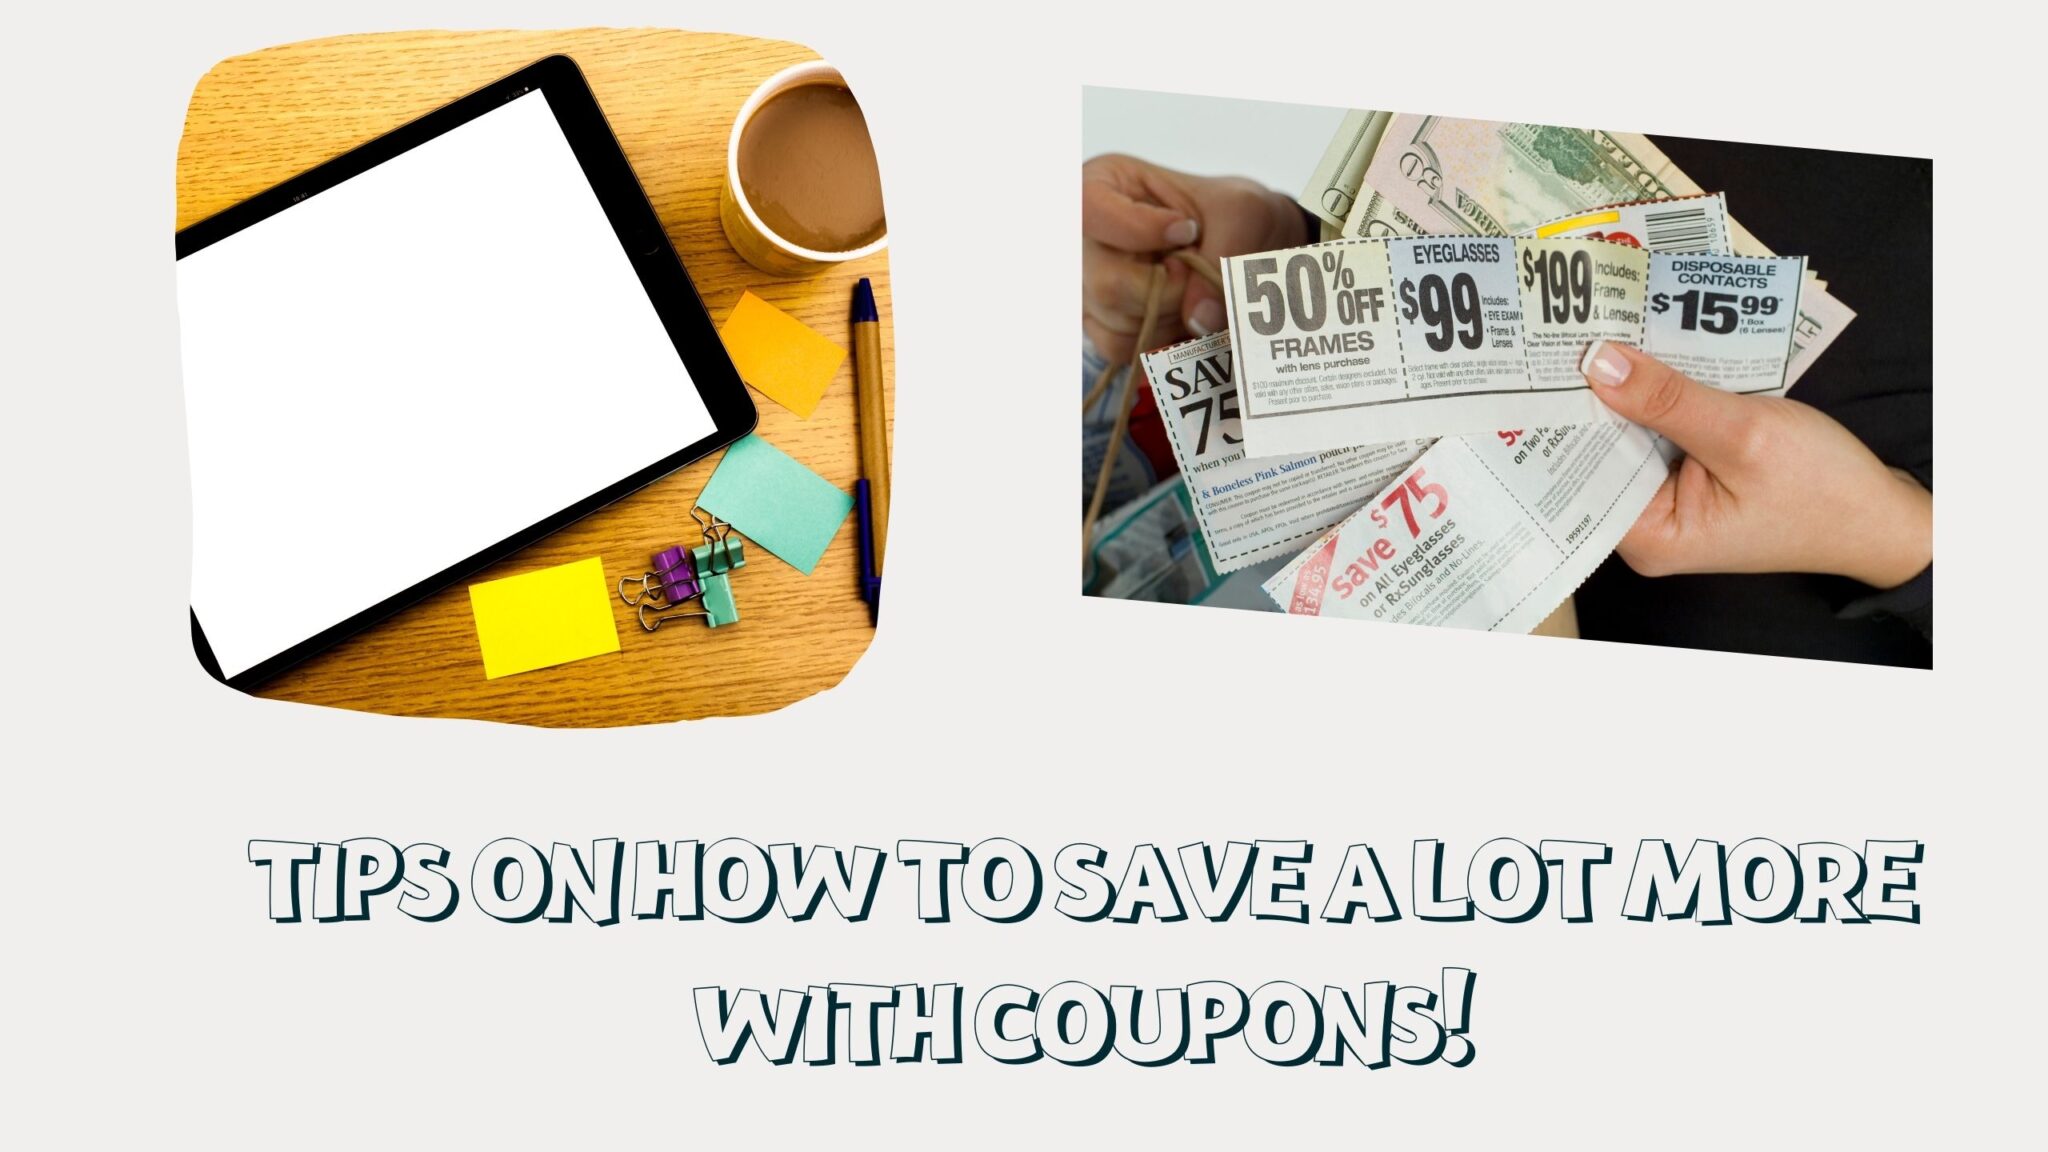 Tips On How To Save A Lot More With Coupons!